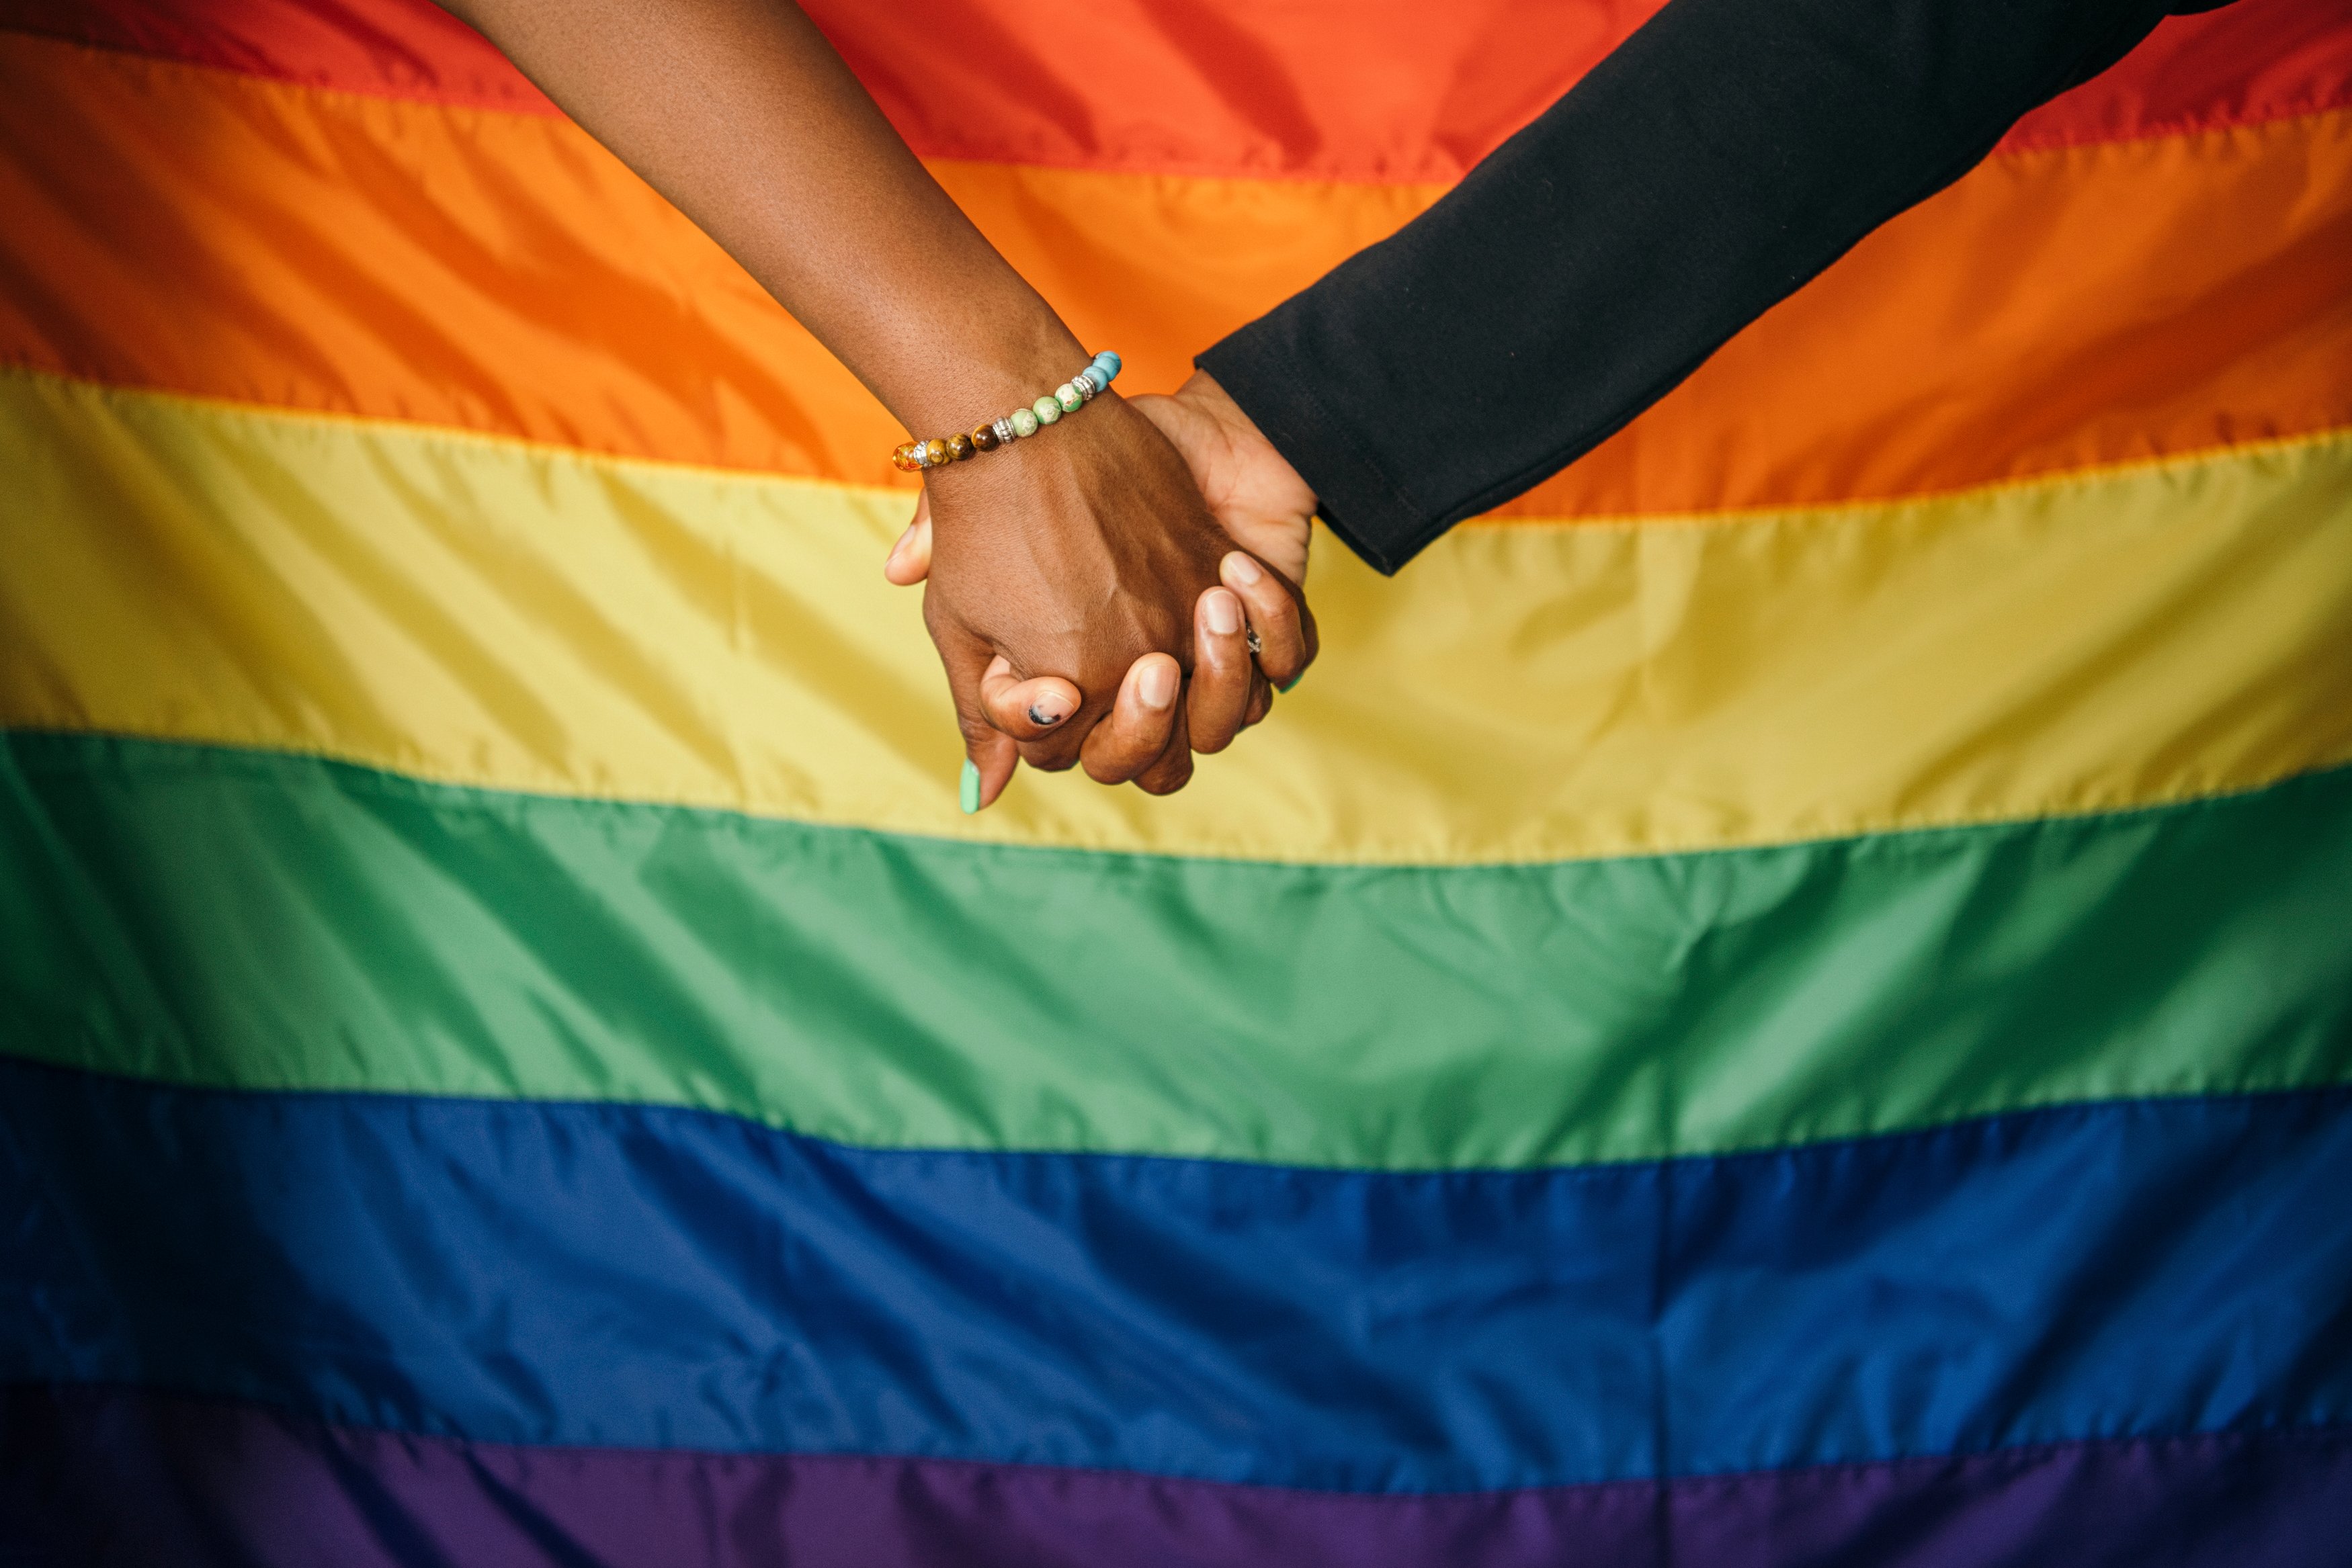 black hand and white hand holding hands in front of pride flag